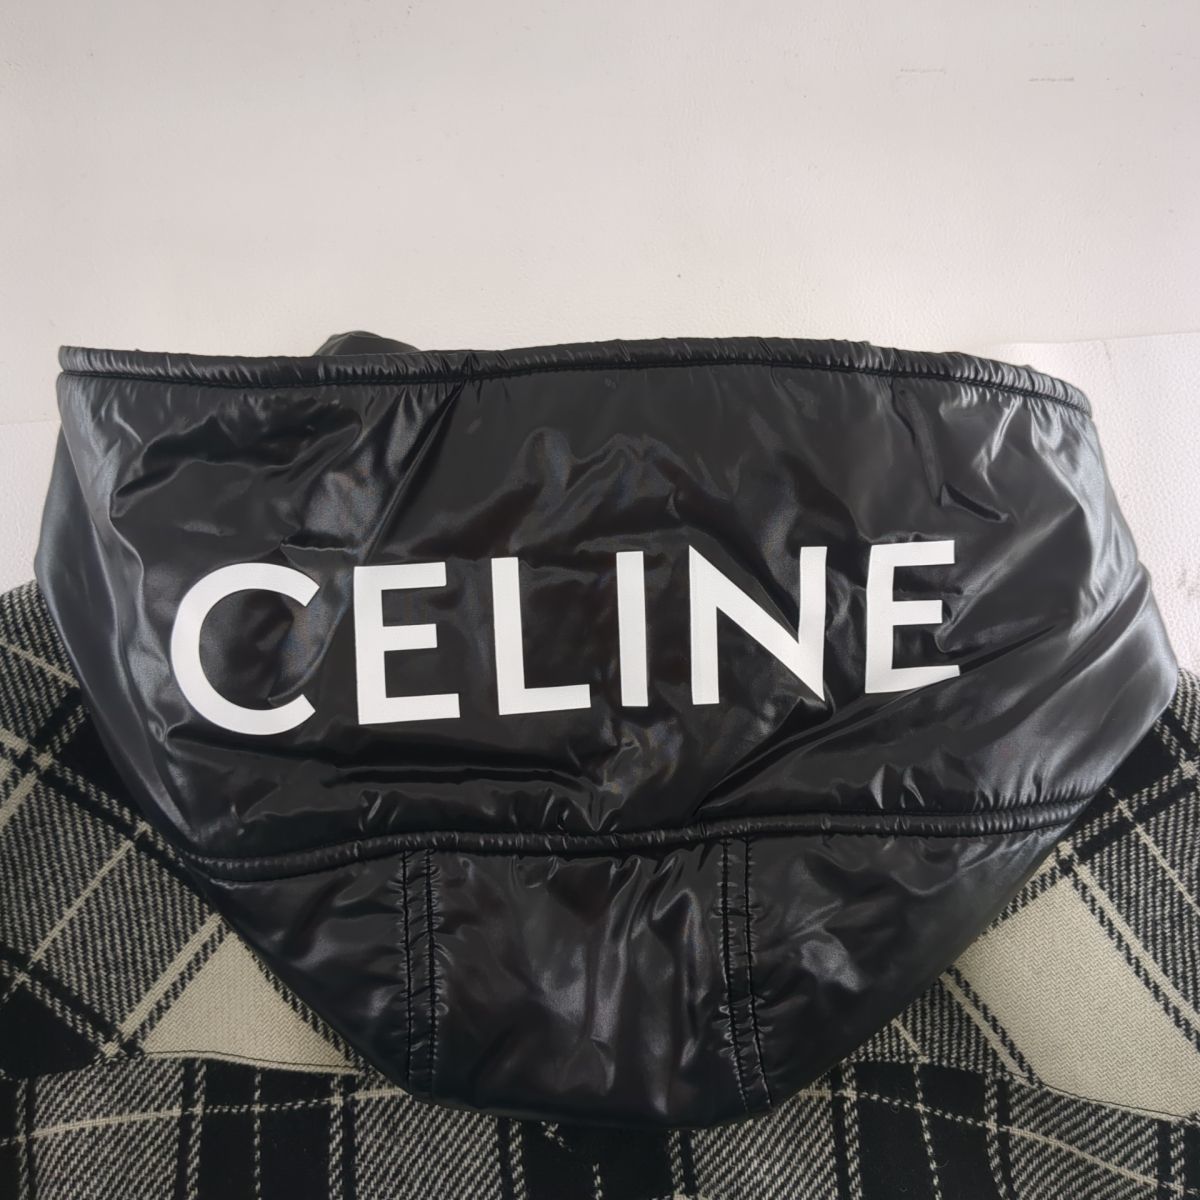  Celine jacket size 52 black white 21AW men's wool check CELINE old clothes used *3114/ height . shop 